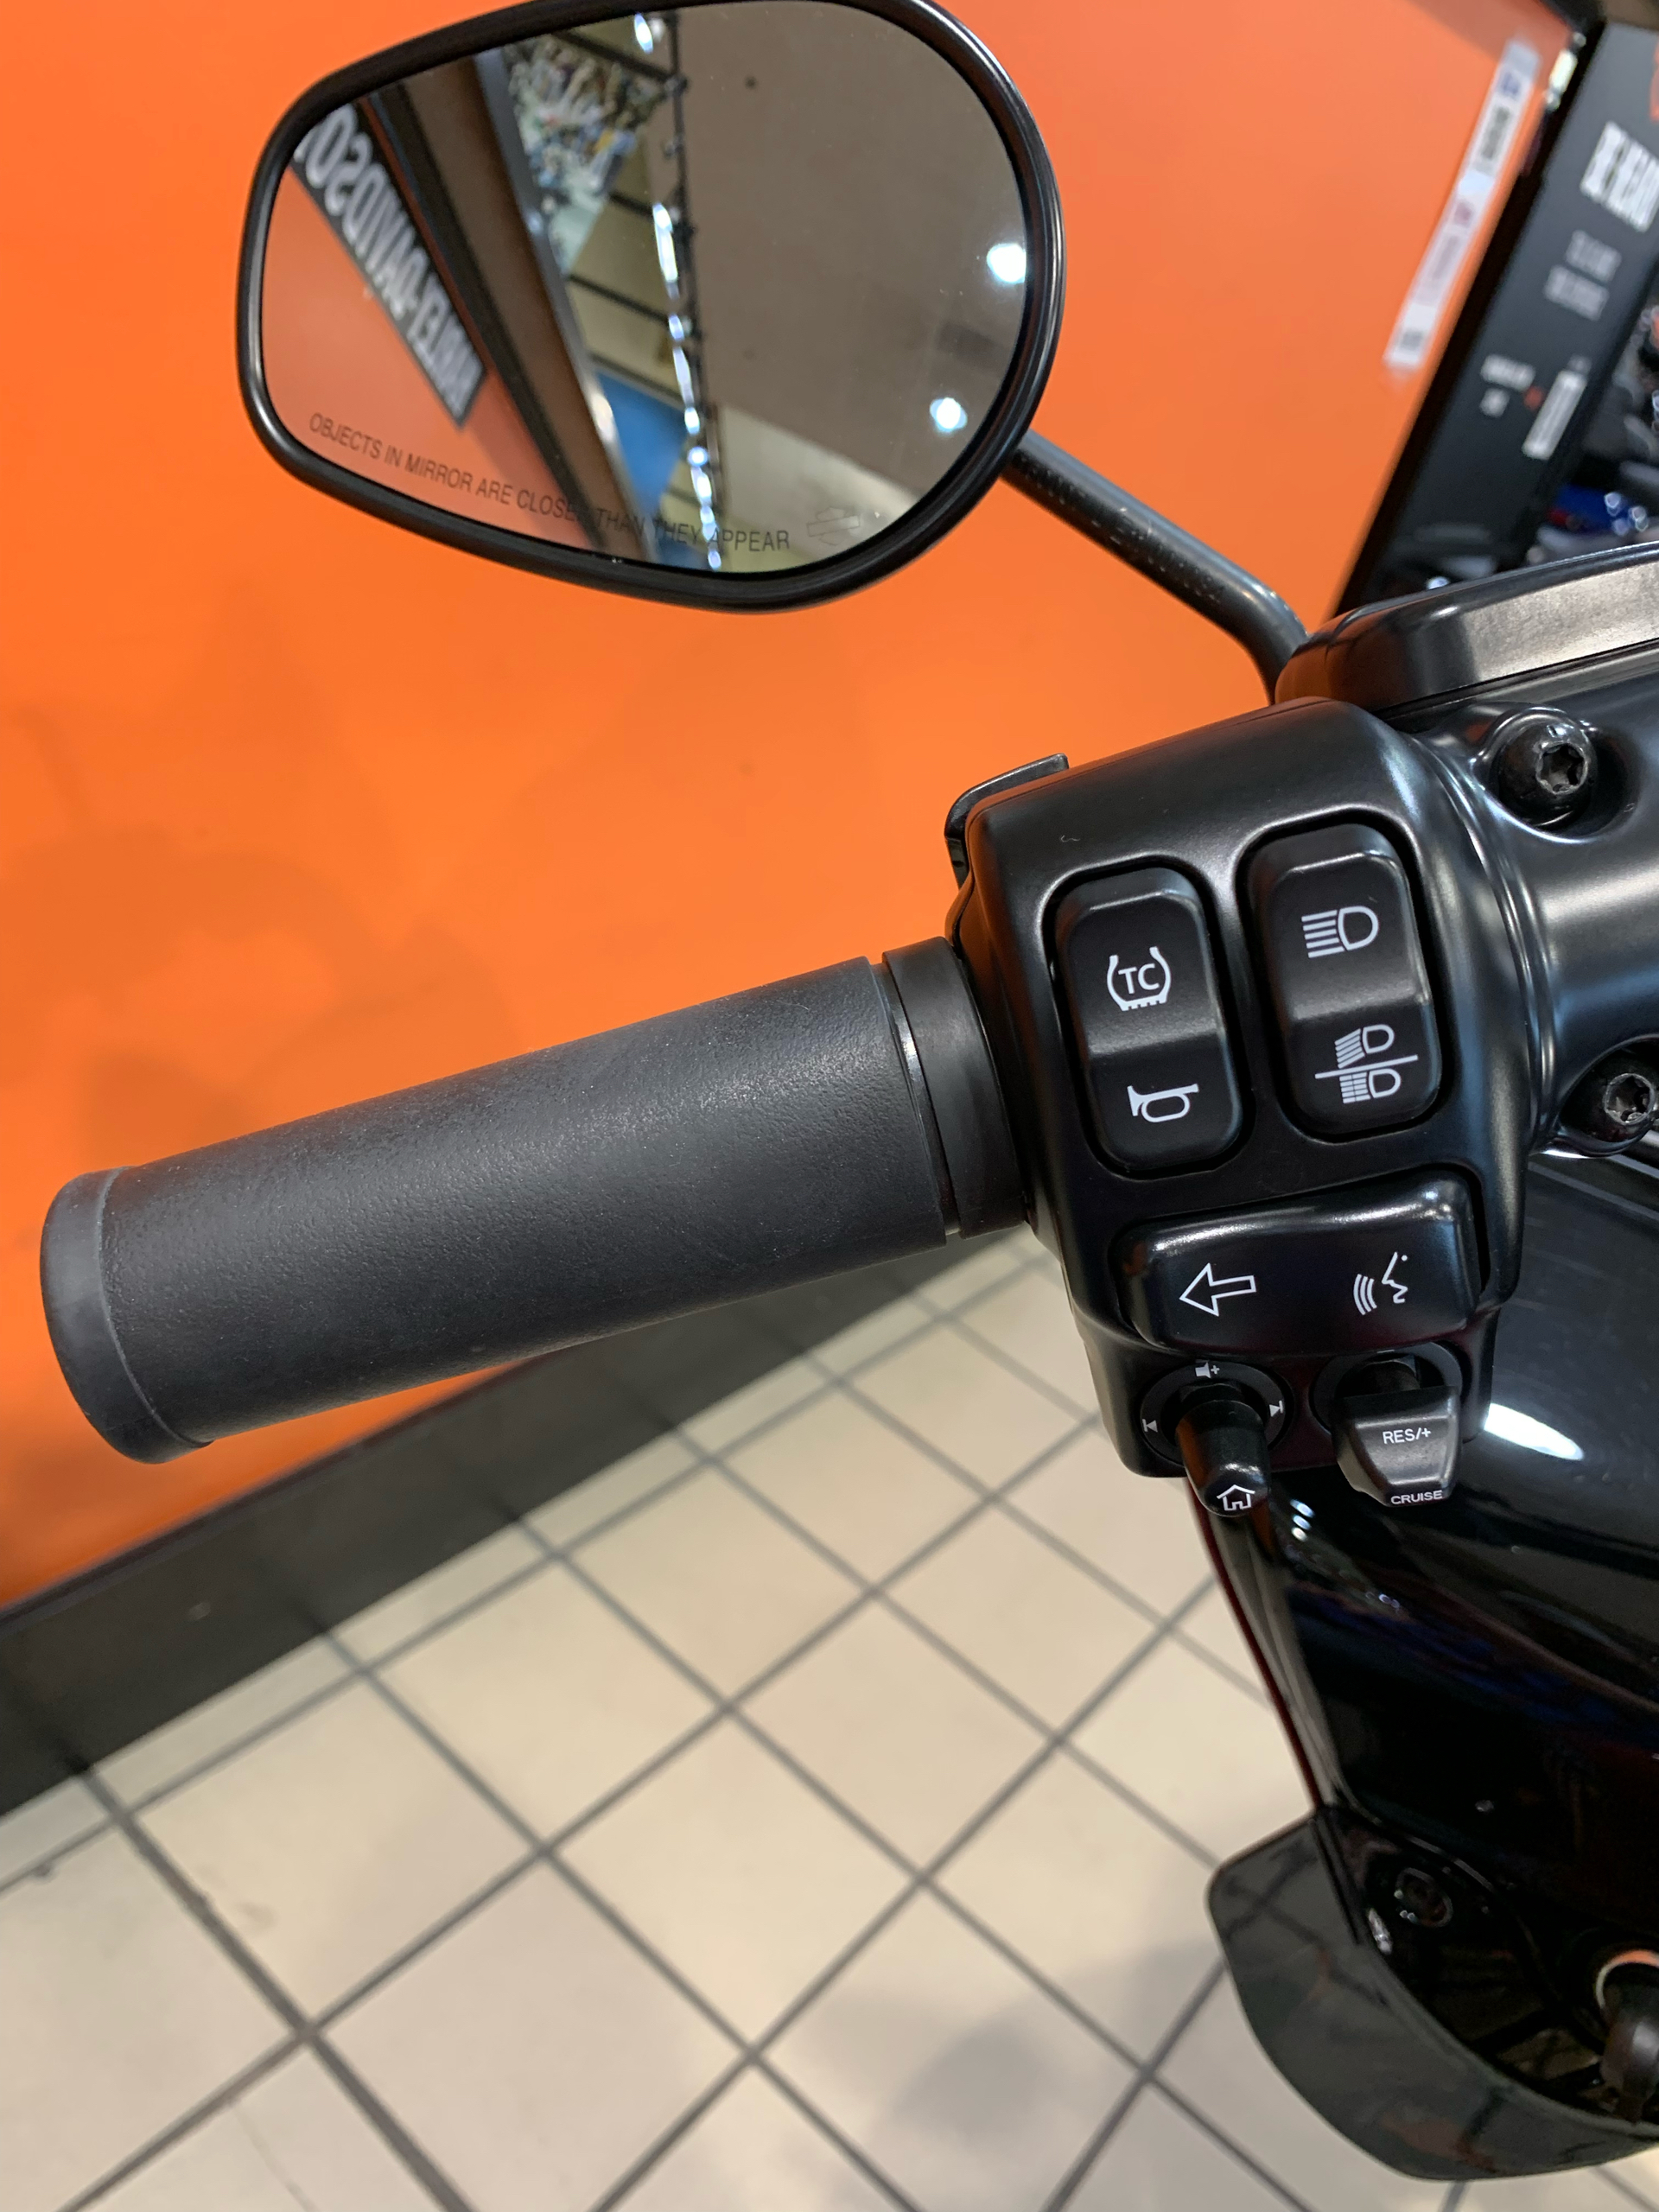 2020 Harley-Davidson ROAD GLIDE SPECIAL in Dumfries, Virginia - Photo 5